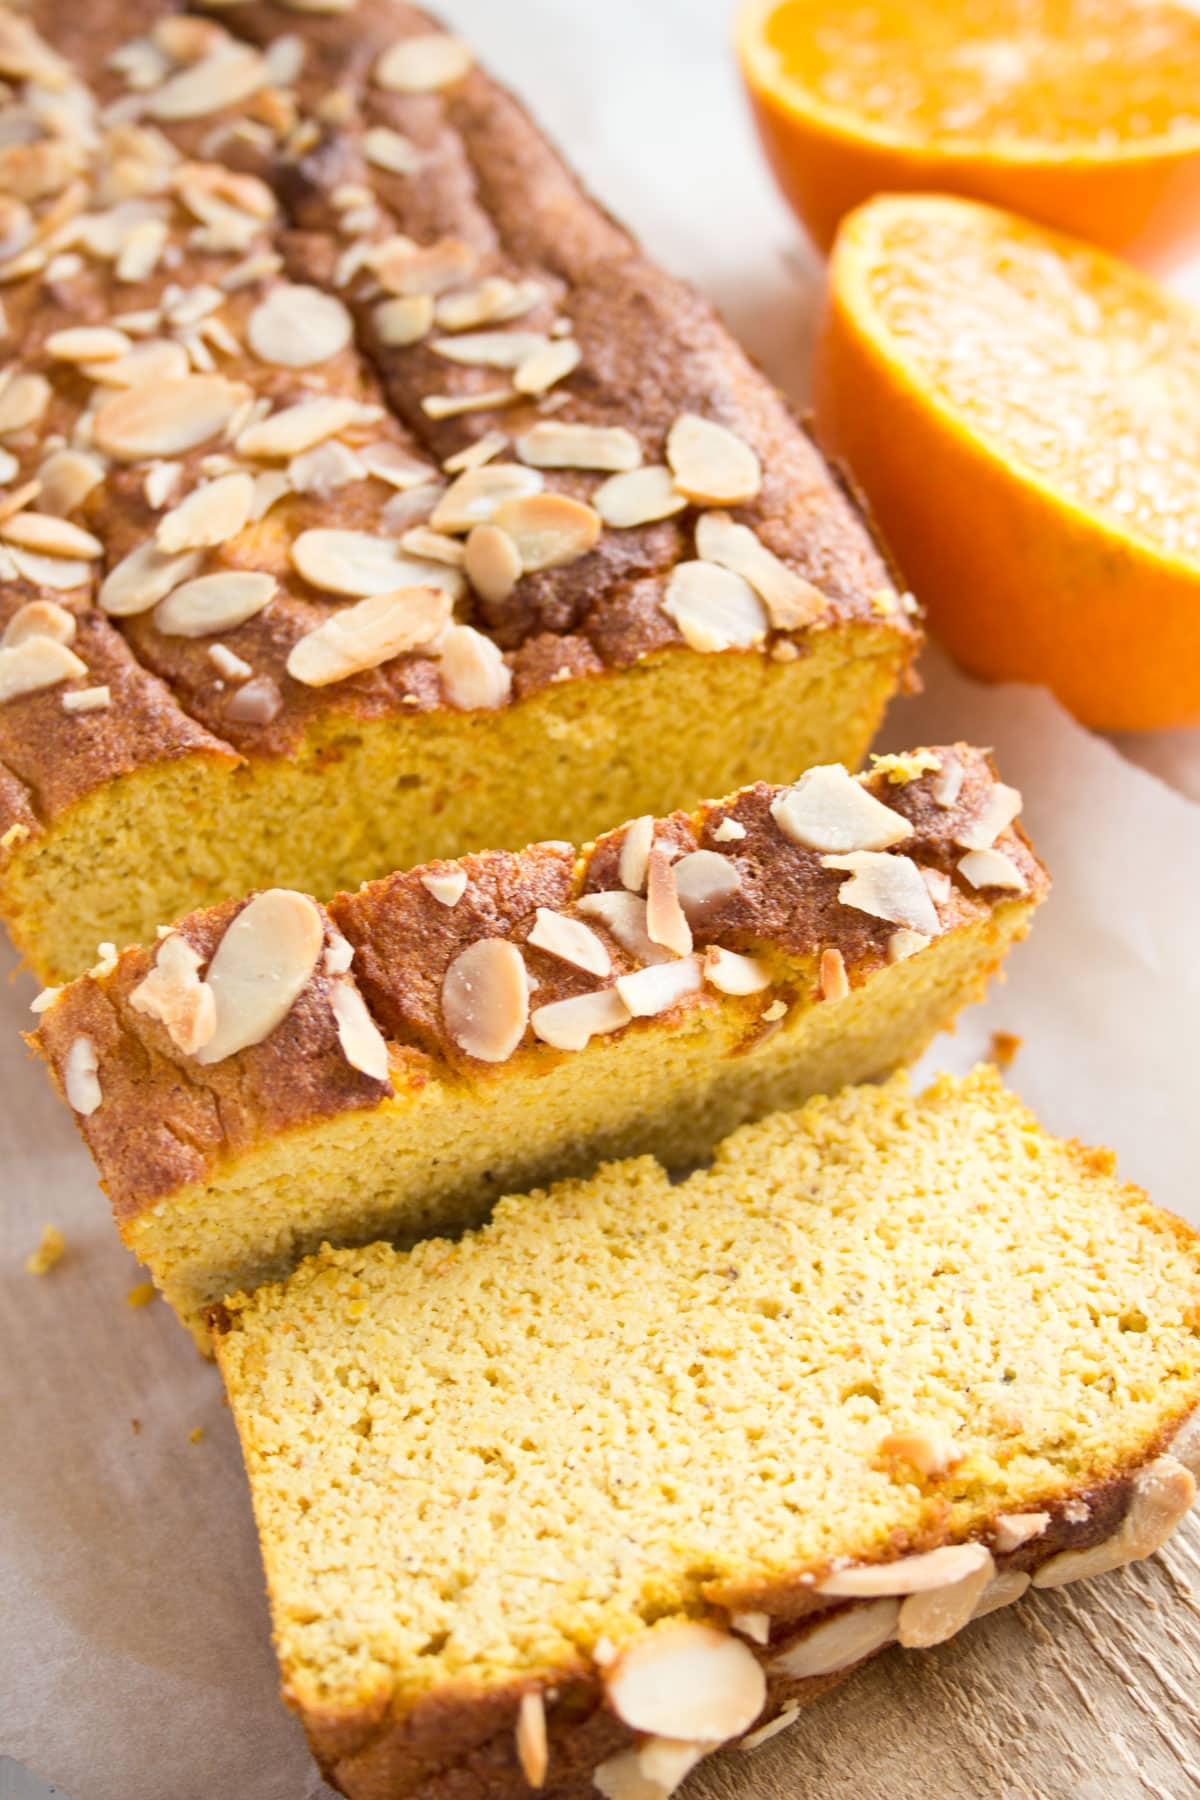 Orange almond loaf cake with 2 slices cut off.